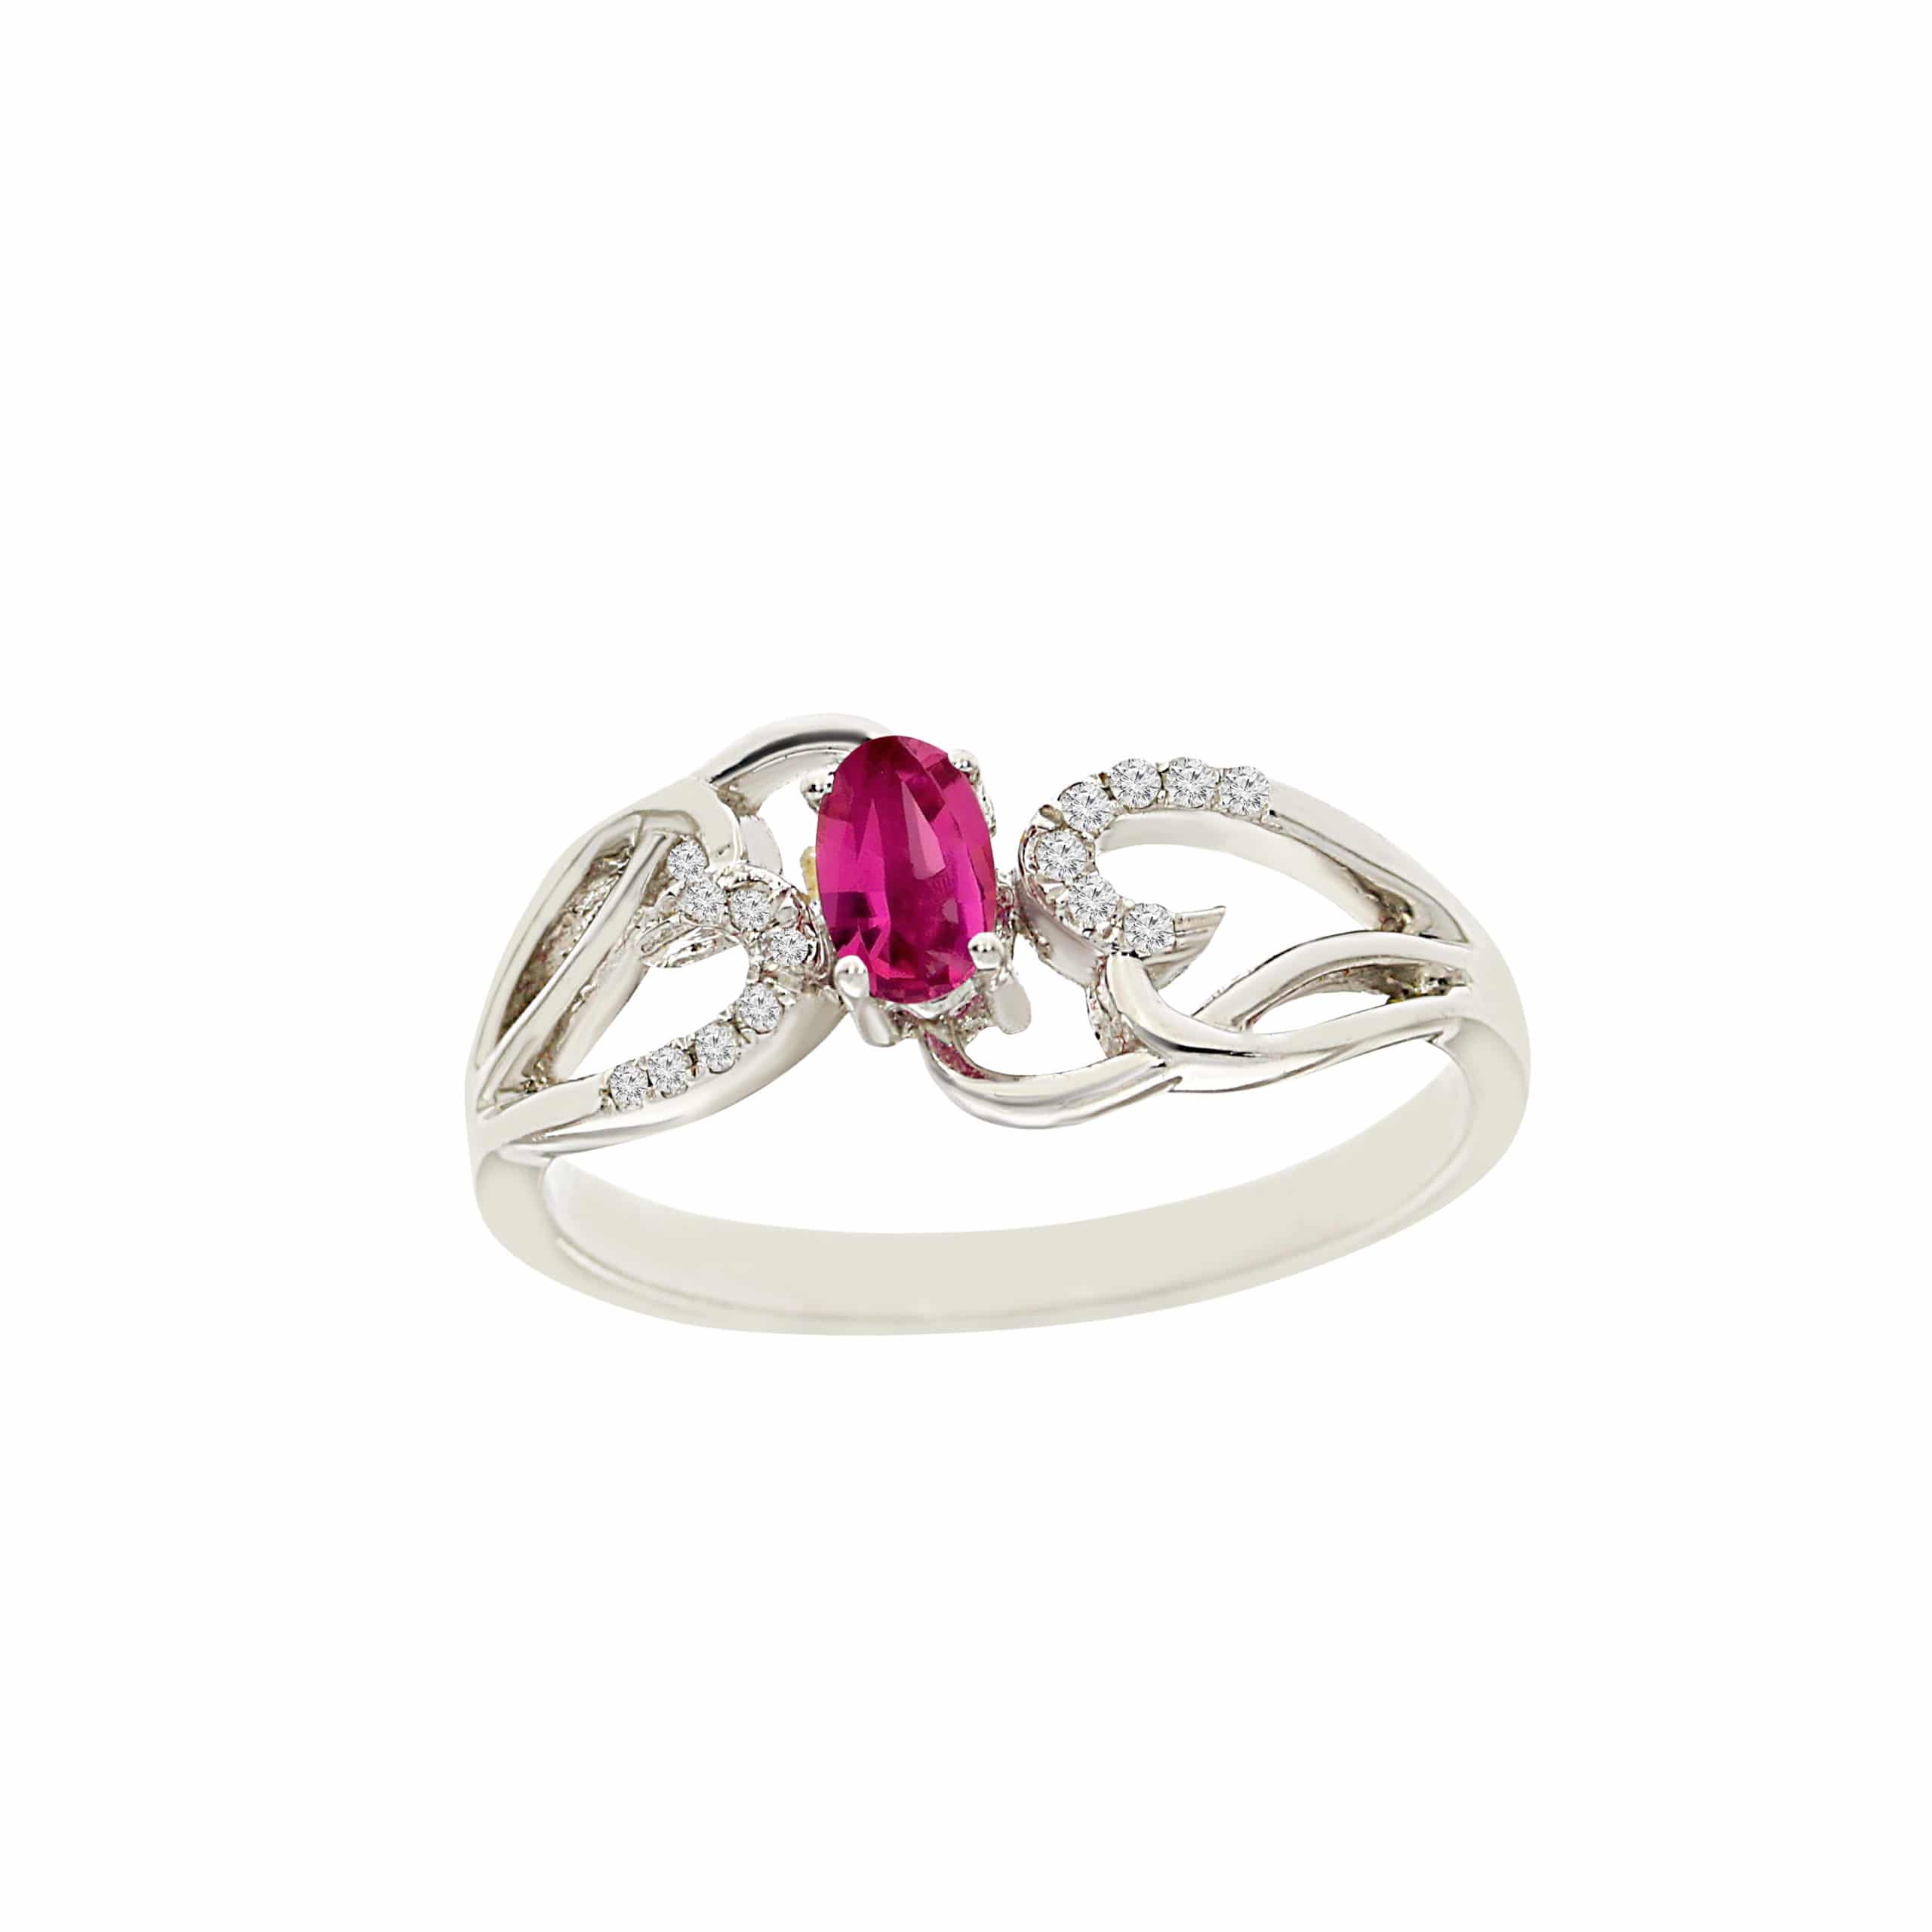 0.28ct Ruby and Diamonds Ring, 14K White Gold